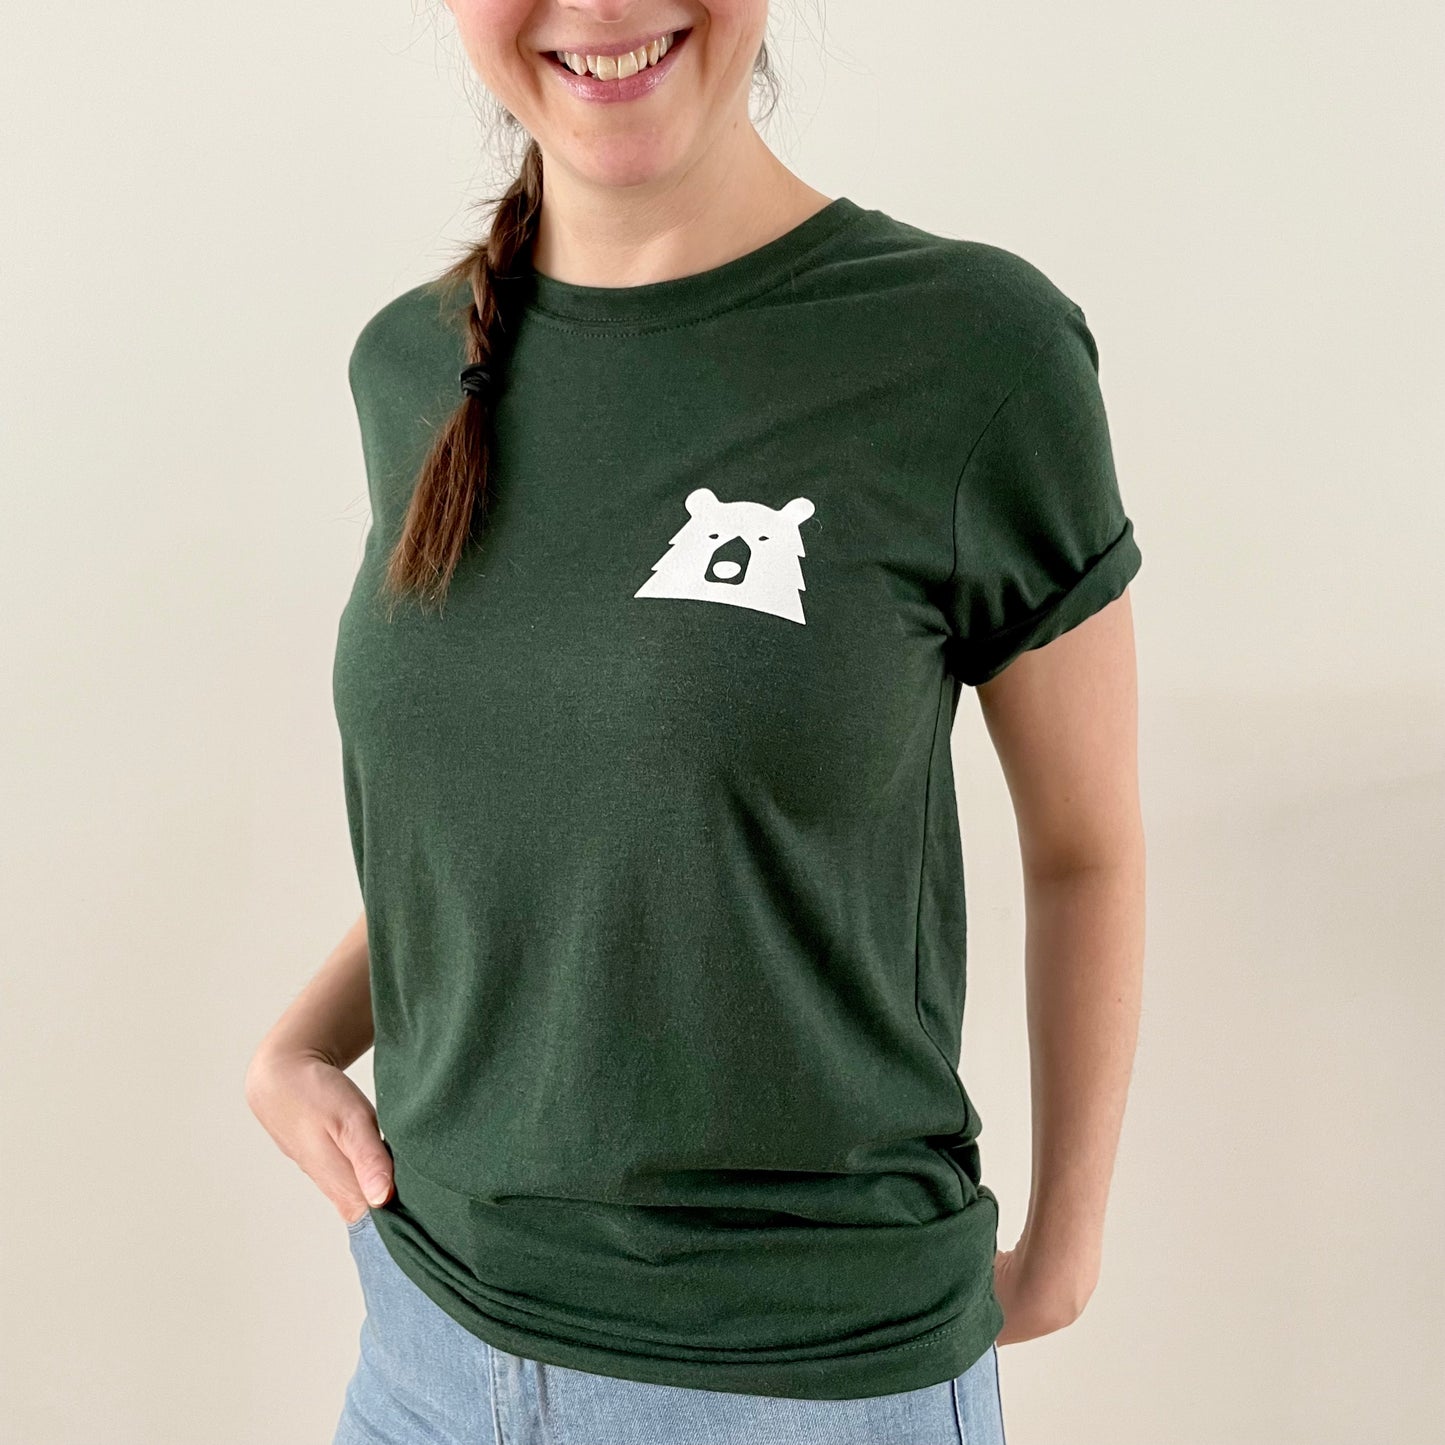 Eco Mascot Tee - Spruce with White